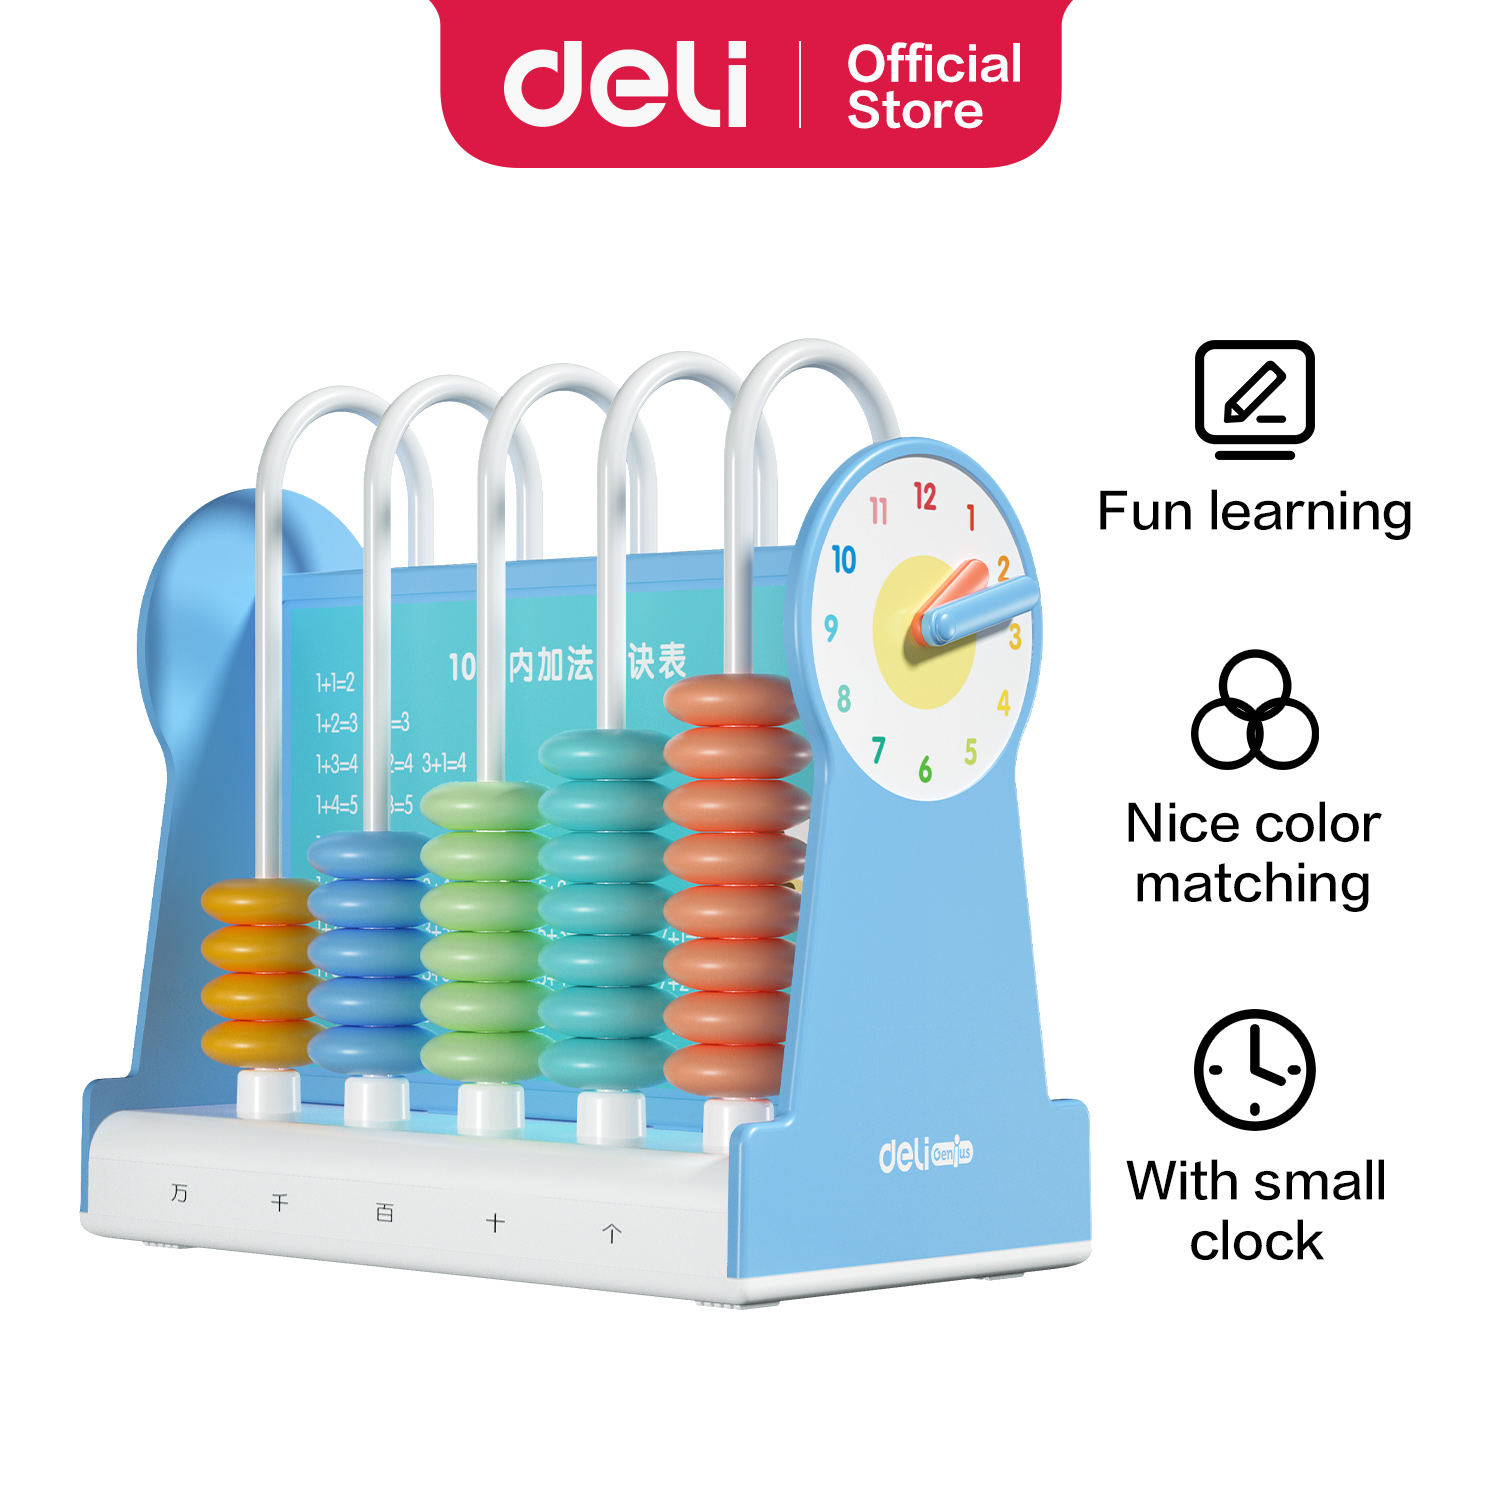 Deli-74314 Kids counter leaning toy